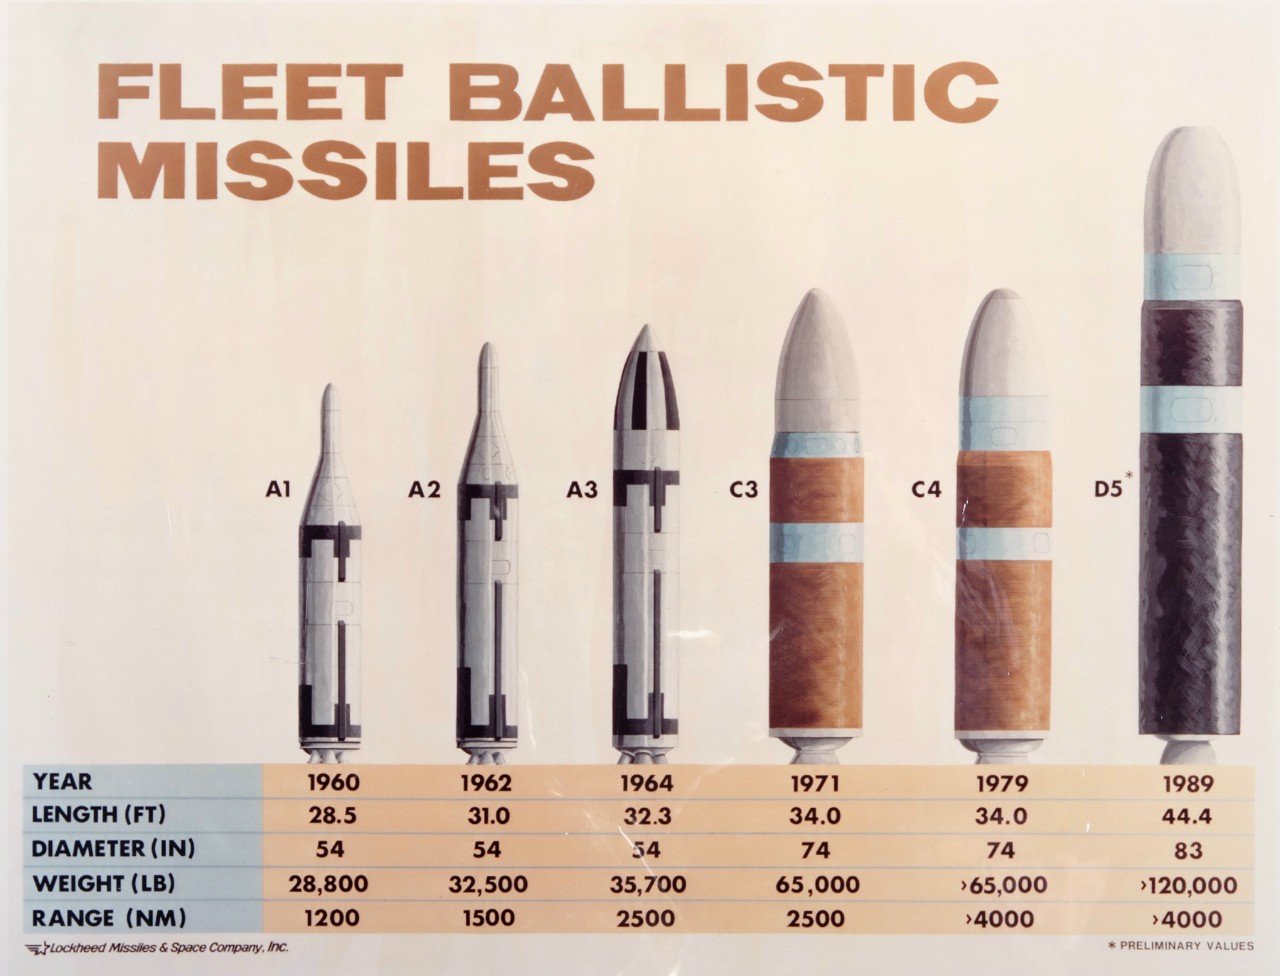 Poster with images of Fleet Ballistic Missiles: A1, Year 1960, Length 28.5 feet, Diameter 54 inches, Weight 28,800 pounds, Range 1200 nautical miles. A2, Year 1962, Length 31.0 feet, Diameter 54 inches, Weight 32,500 pounds, Range 1500 nautical m...